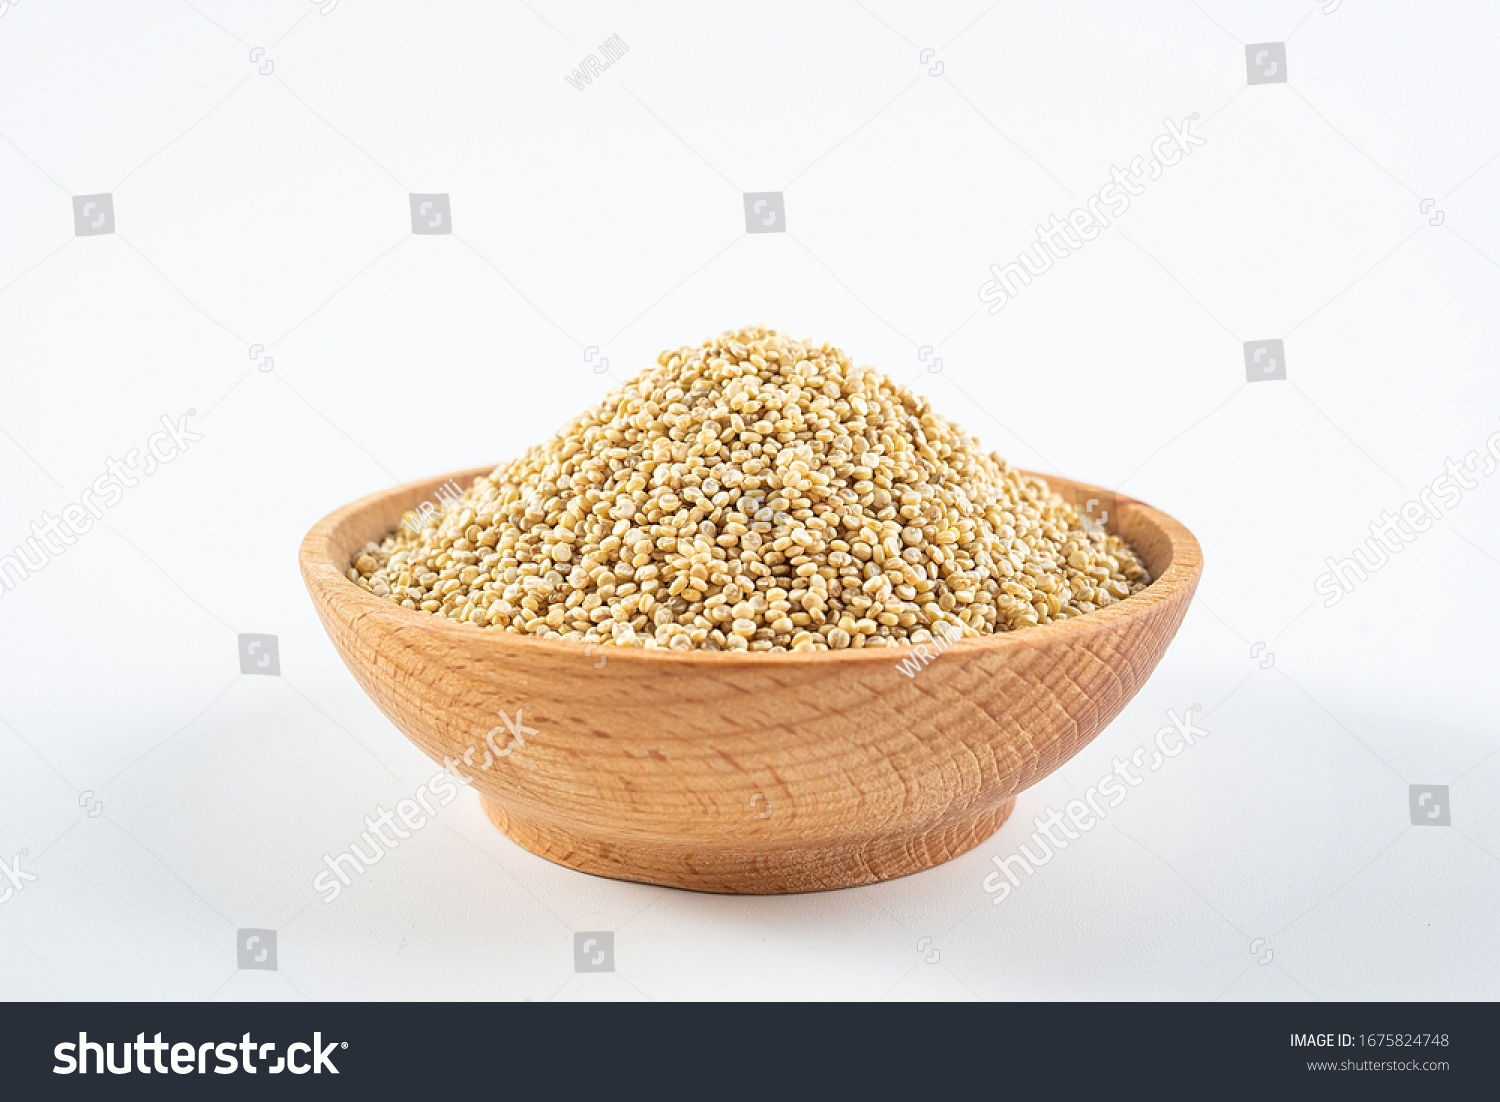 A wooden bowl of miscellaneous grains buckwheat on a white background	
 #1675824748